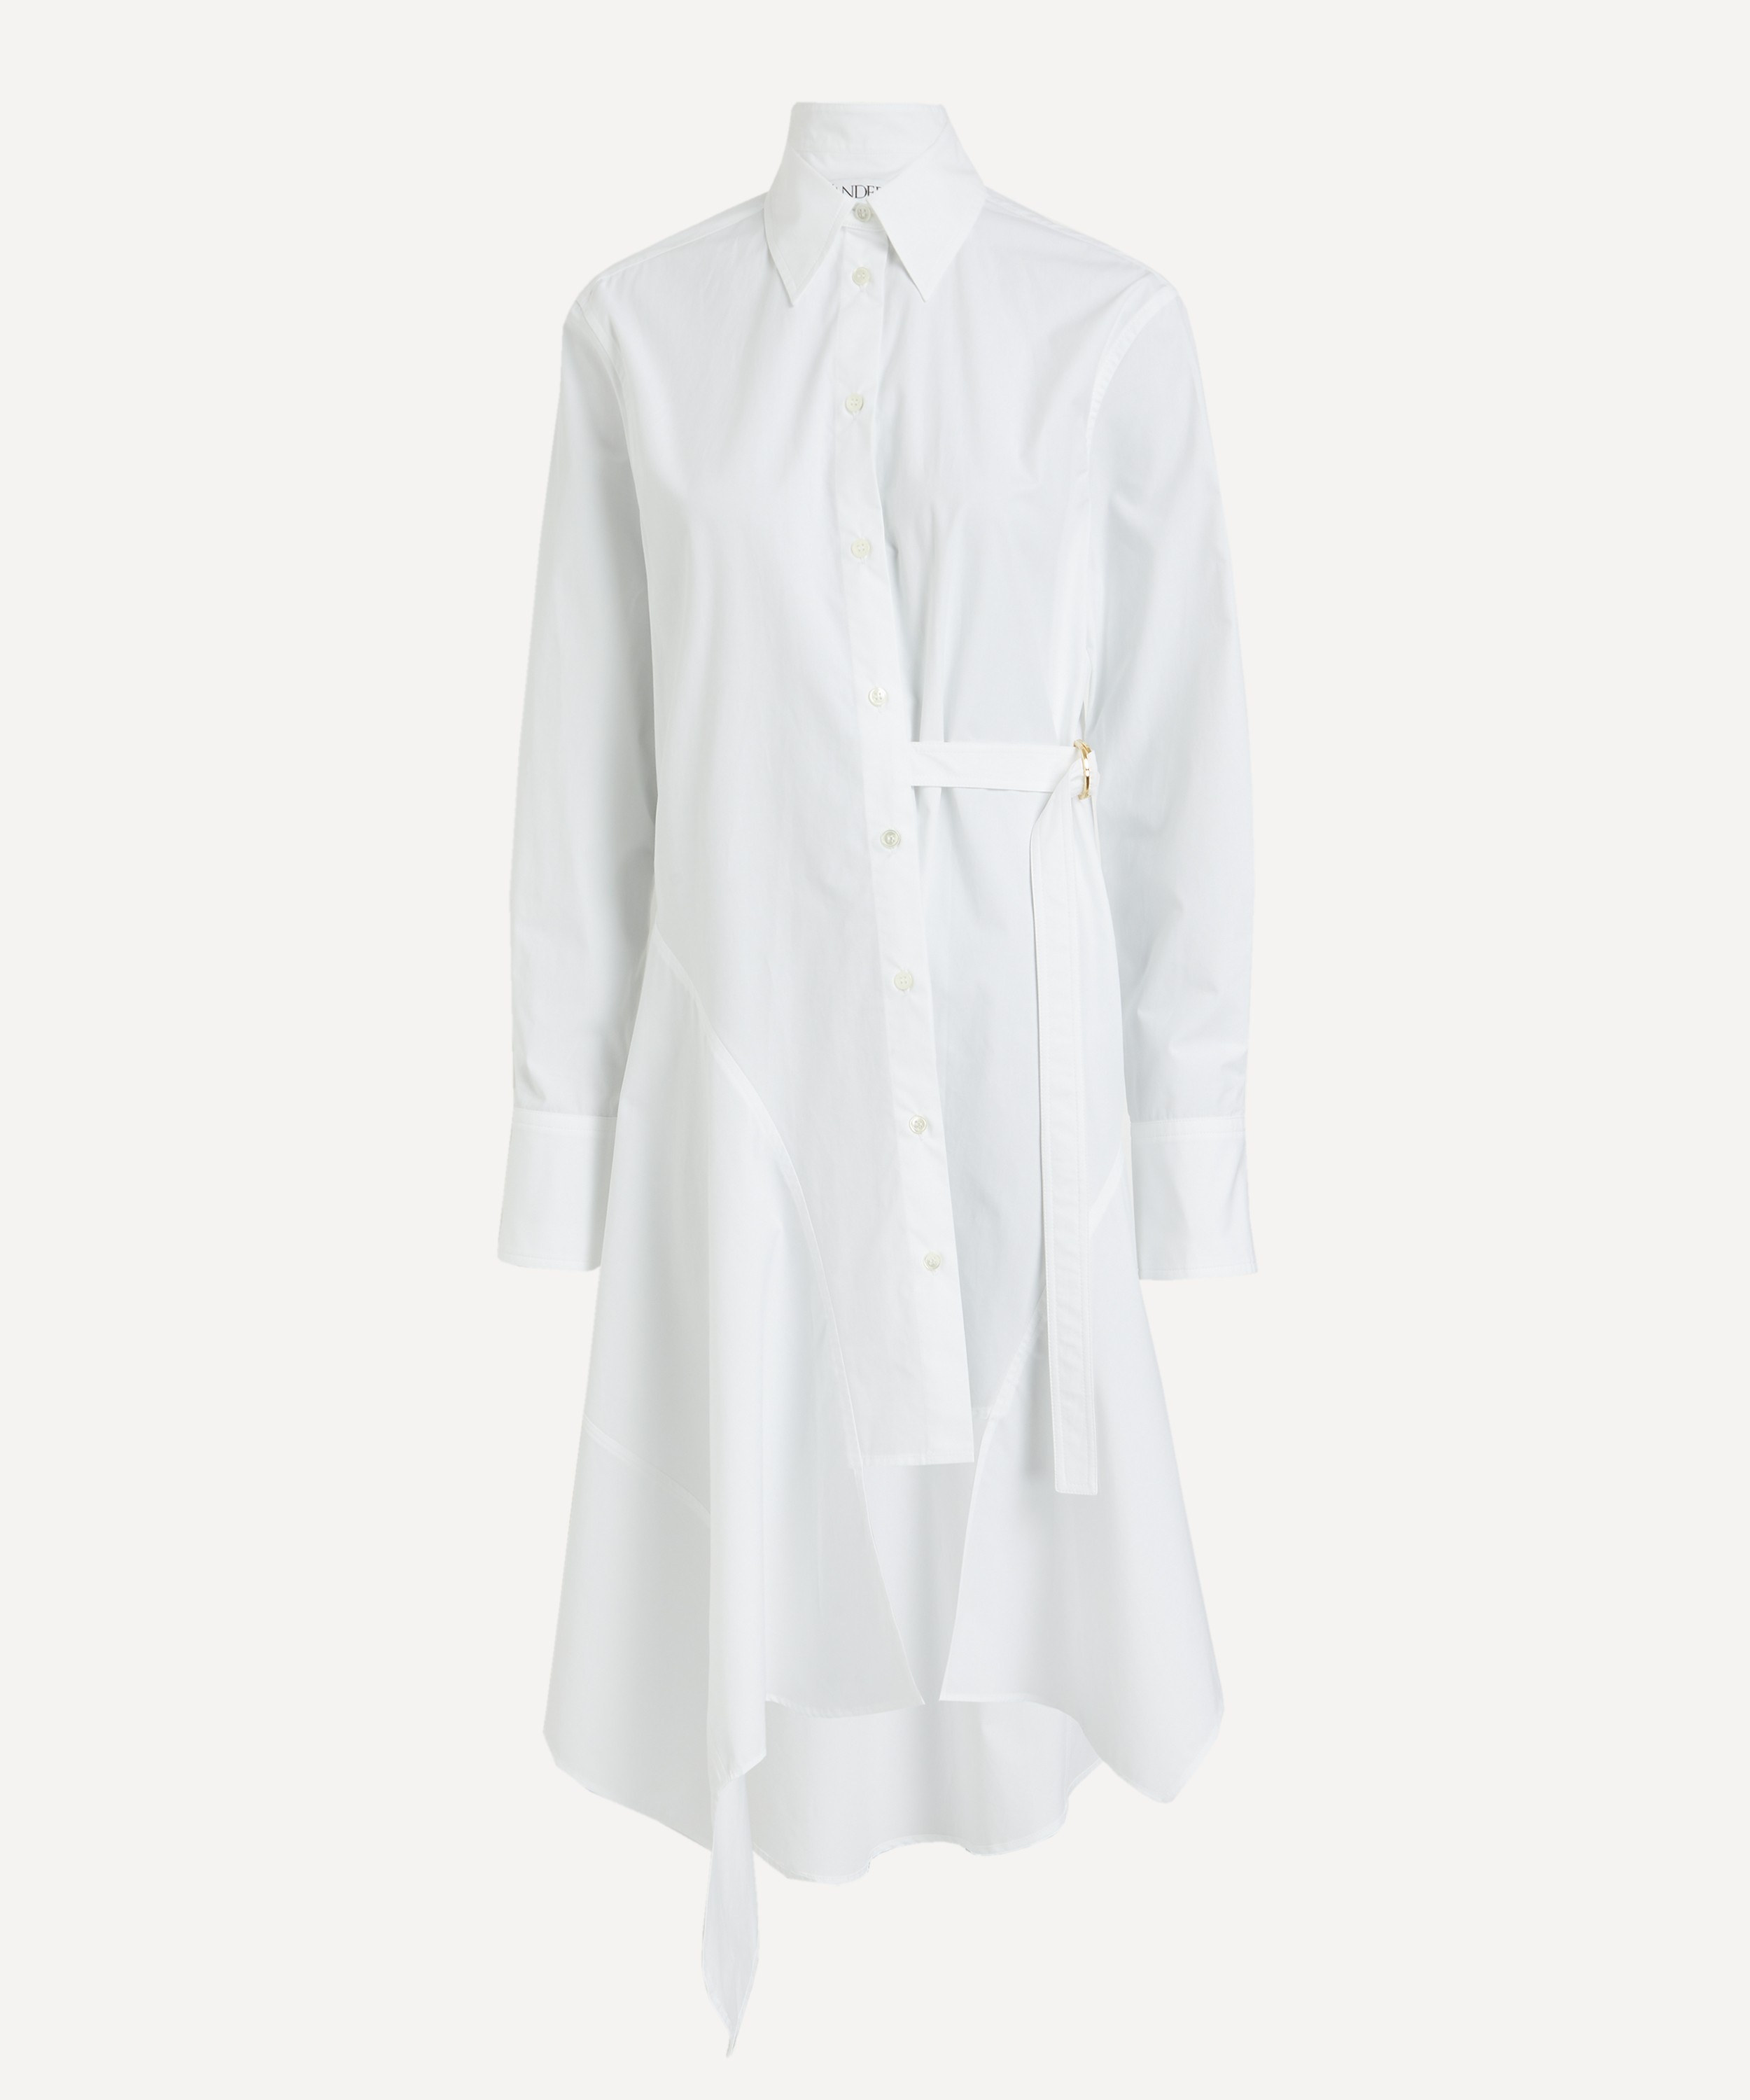 JW Anderson - Deconstructed Shirtdress